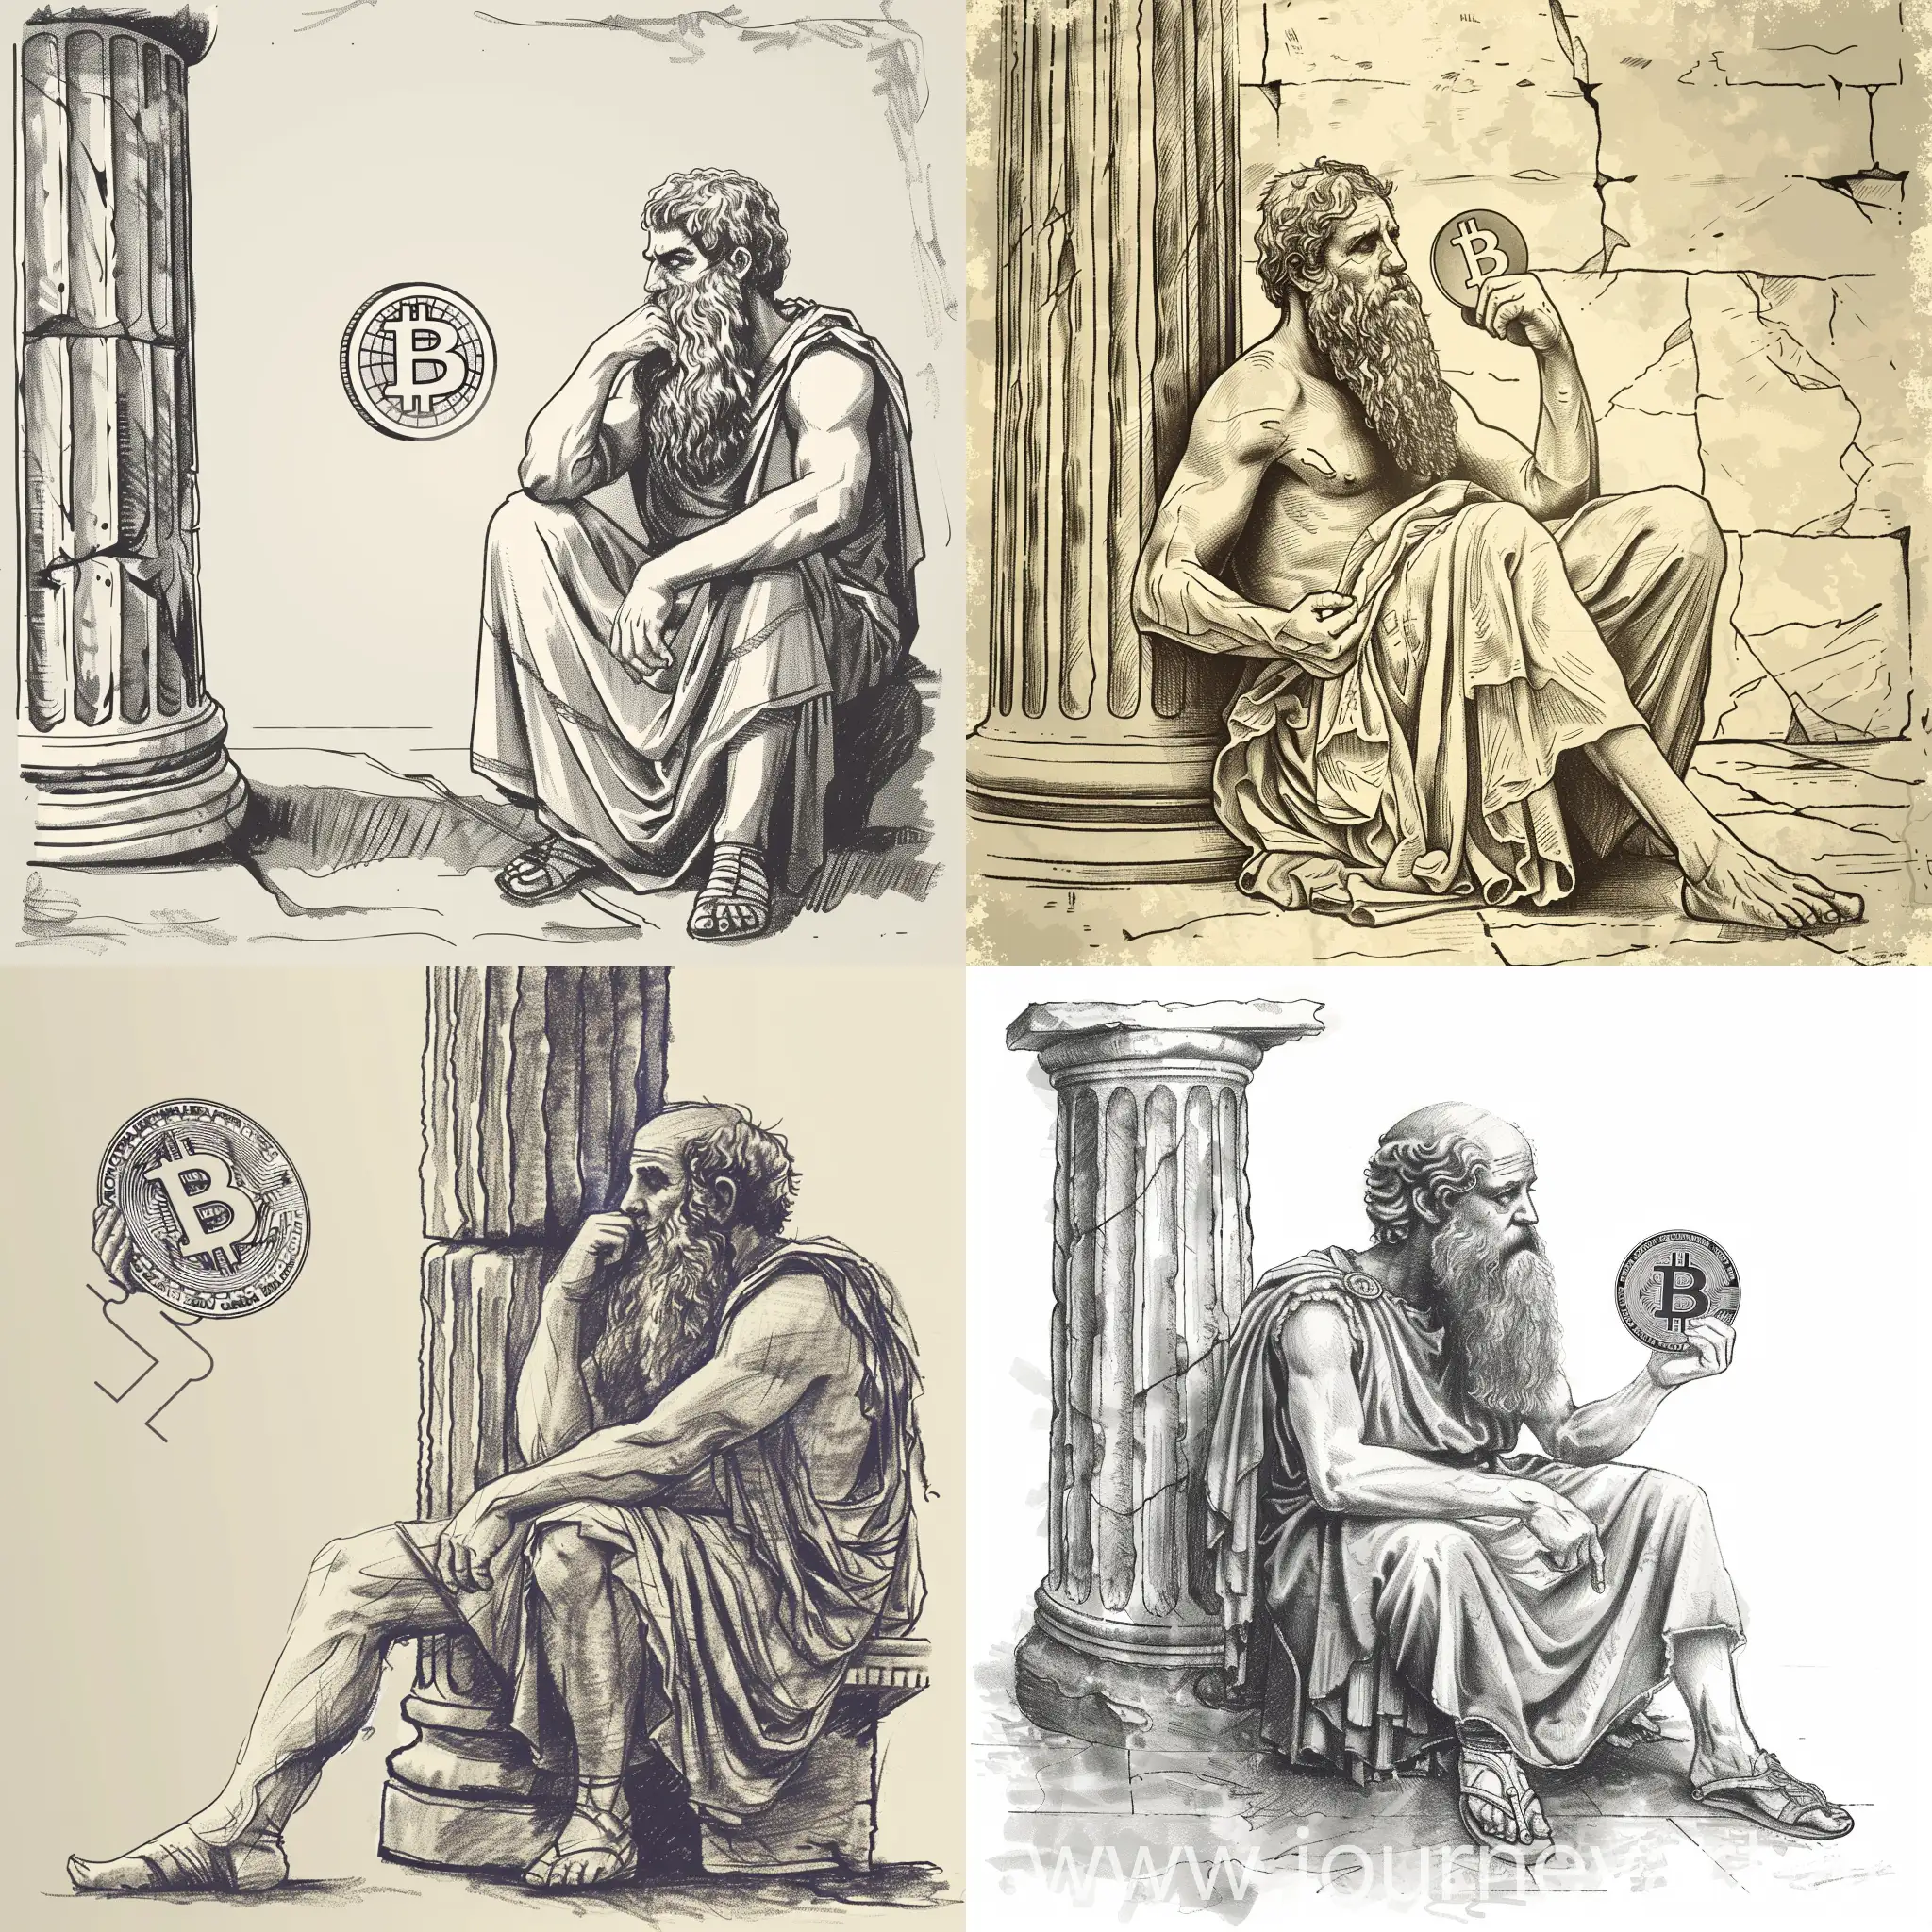 a sketch of Greek philosopher with a long beard sitting near a Greek column thinking and holding a bitcoin symbol in his hand